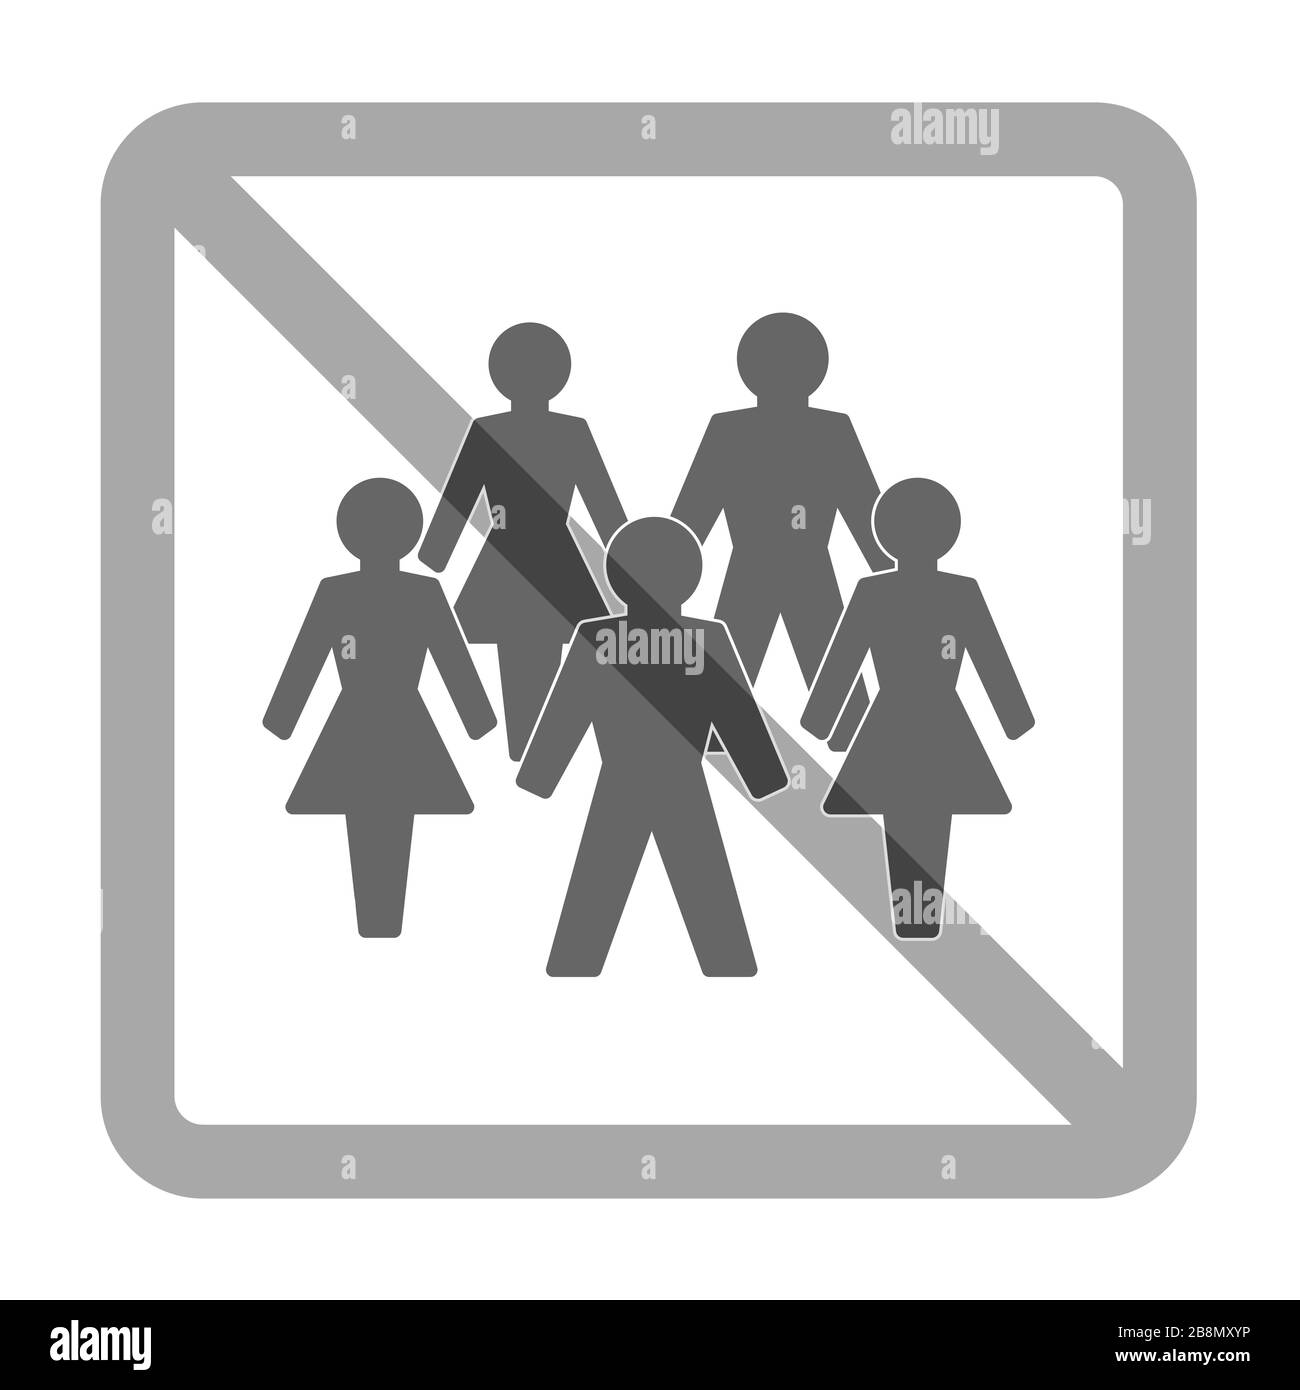 Social distancing. Ban on gathering symbol. Prohibition of assembly to avoid coronavirus infection - illustration on white background. Stock Photo